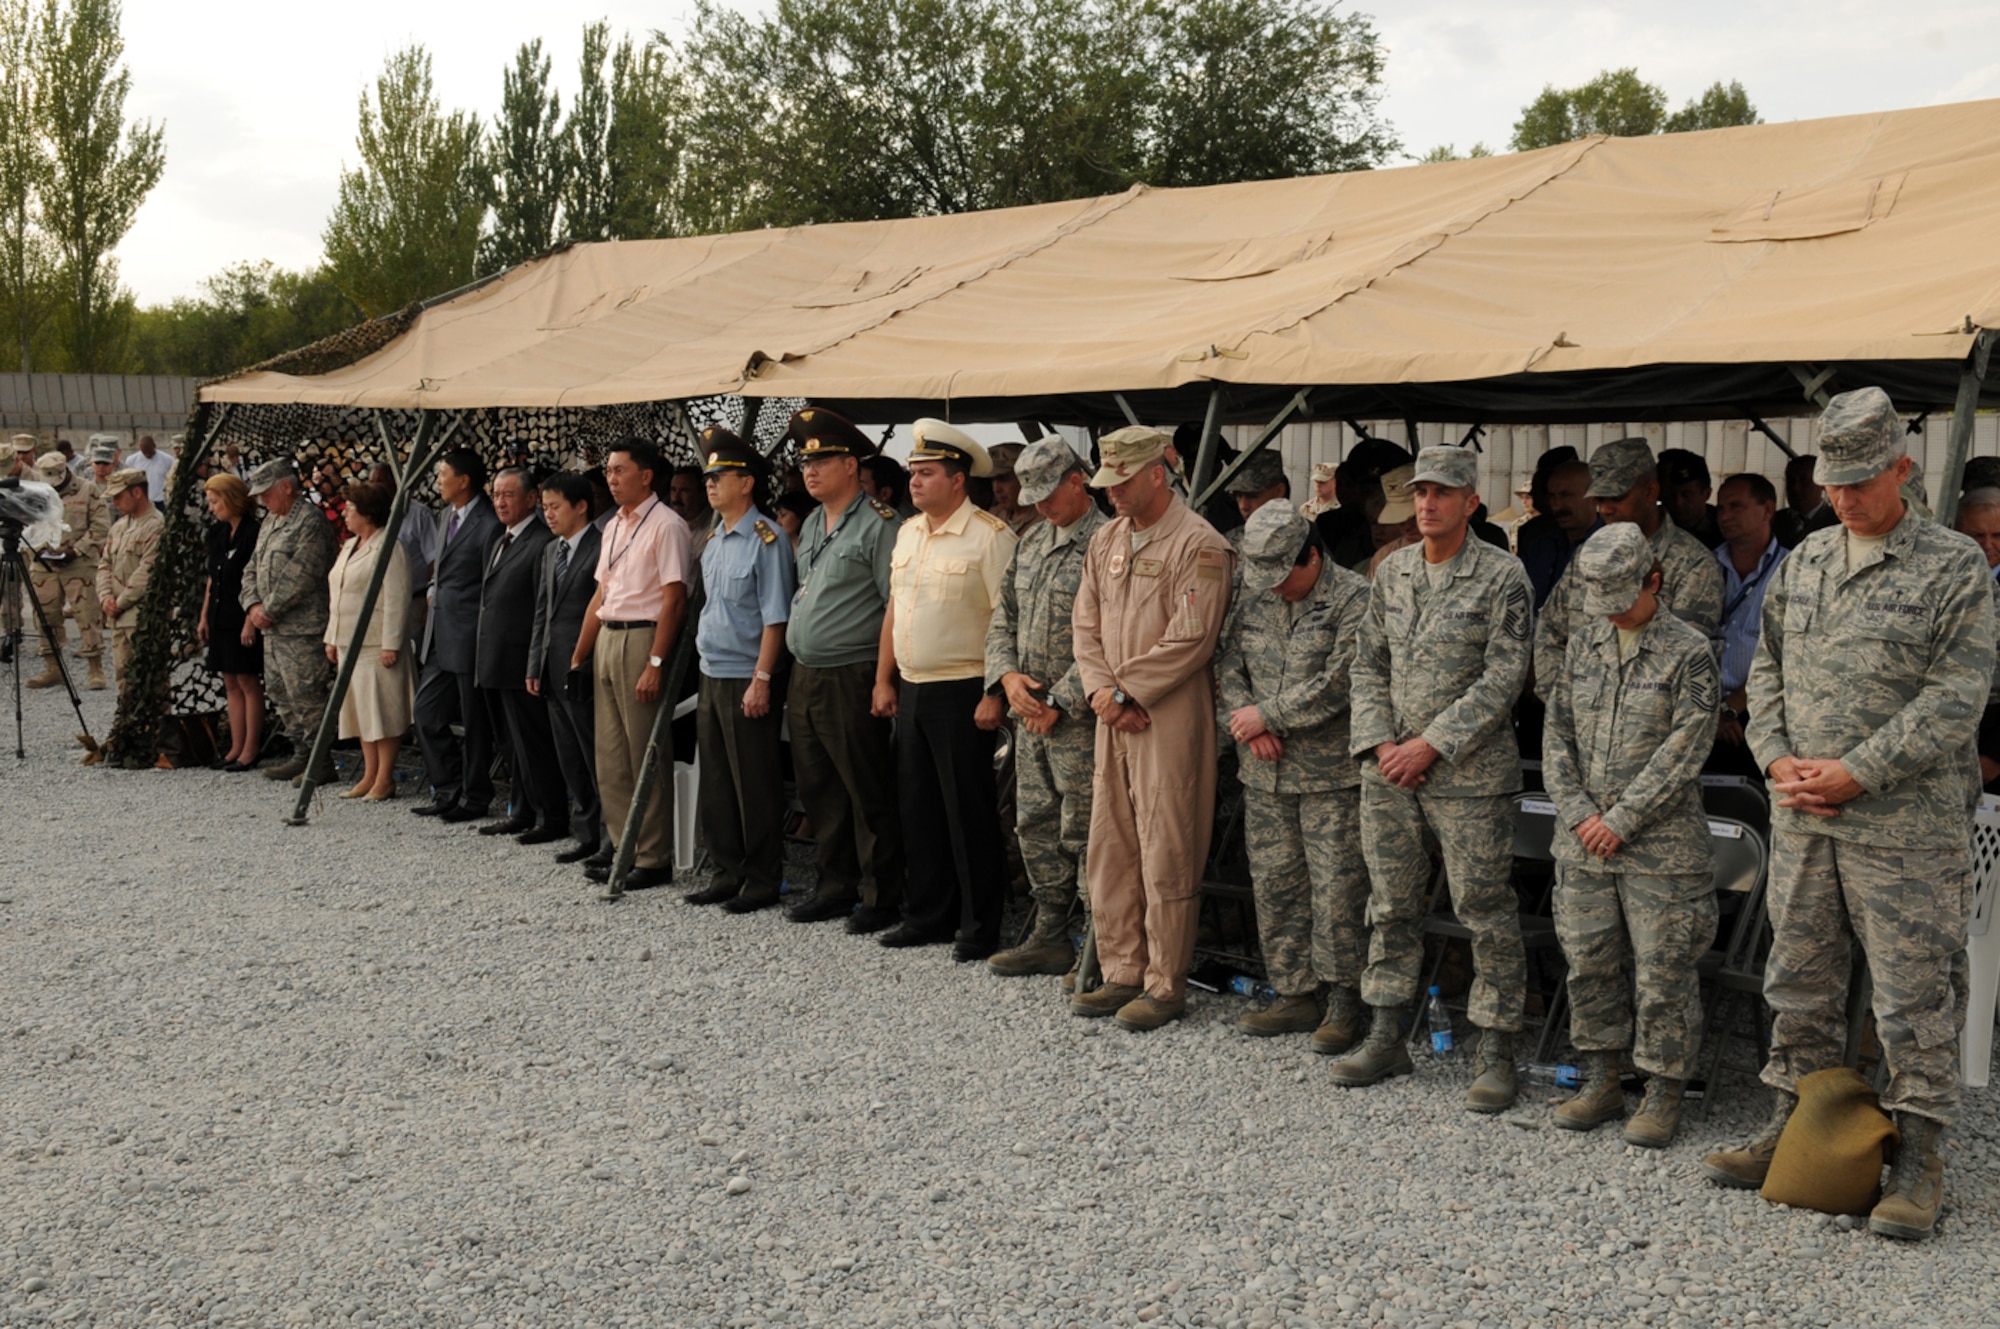 MANAS AIR BASE, KYRGYZ REPUBLIC -- Dignitaries and representatives from ten nations pay their respects with more than 200 coalition servicemembers during the Sept. 11 remembrance ceremony here. The event paid tribute to the tragic events of 9/11 and the sacrifices made in the Global War on Terrorism since. (Air Force photo / Senior Airman Ruth Holcomb)  